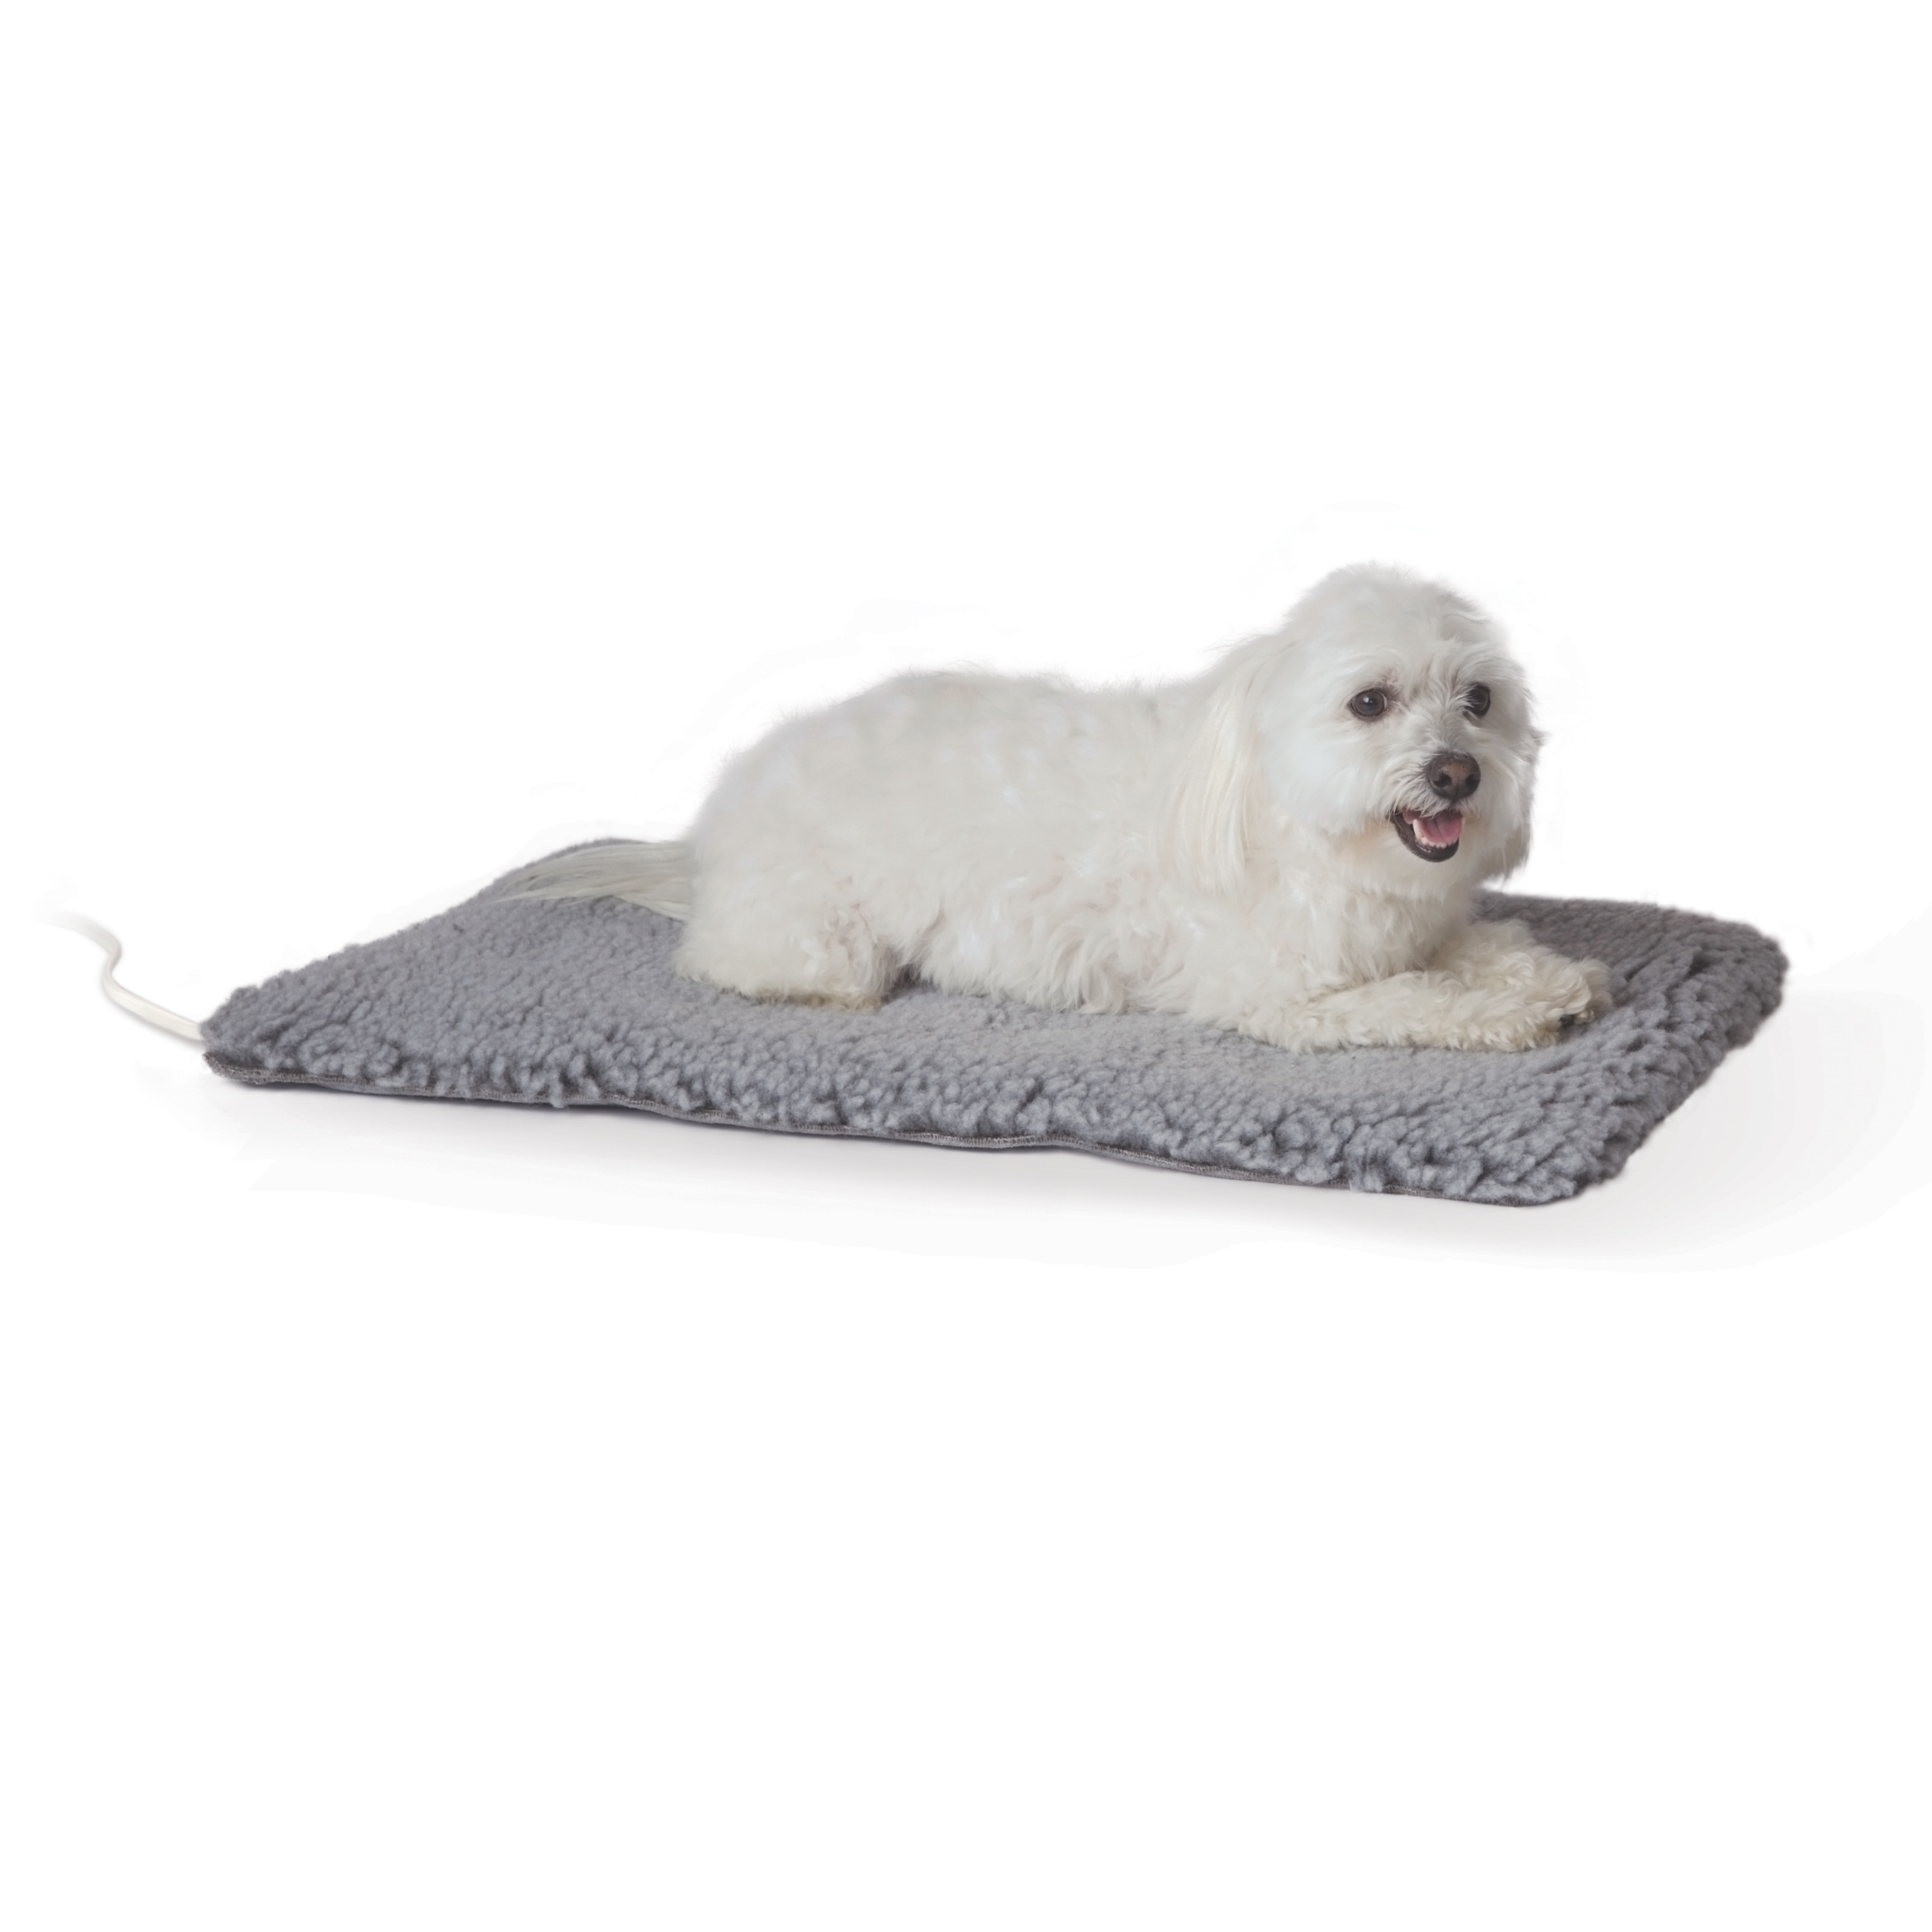 K&H Pet Products Thermo Plush Pad Indoor Heated Pet Bed Gray Medium 17.5 X 28 Inches - image 1 of 8